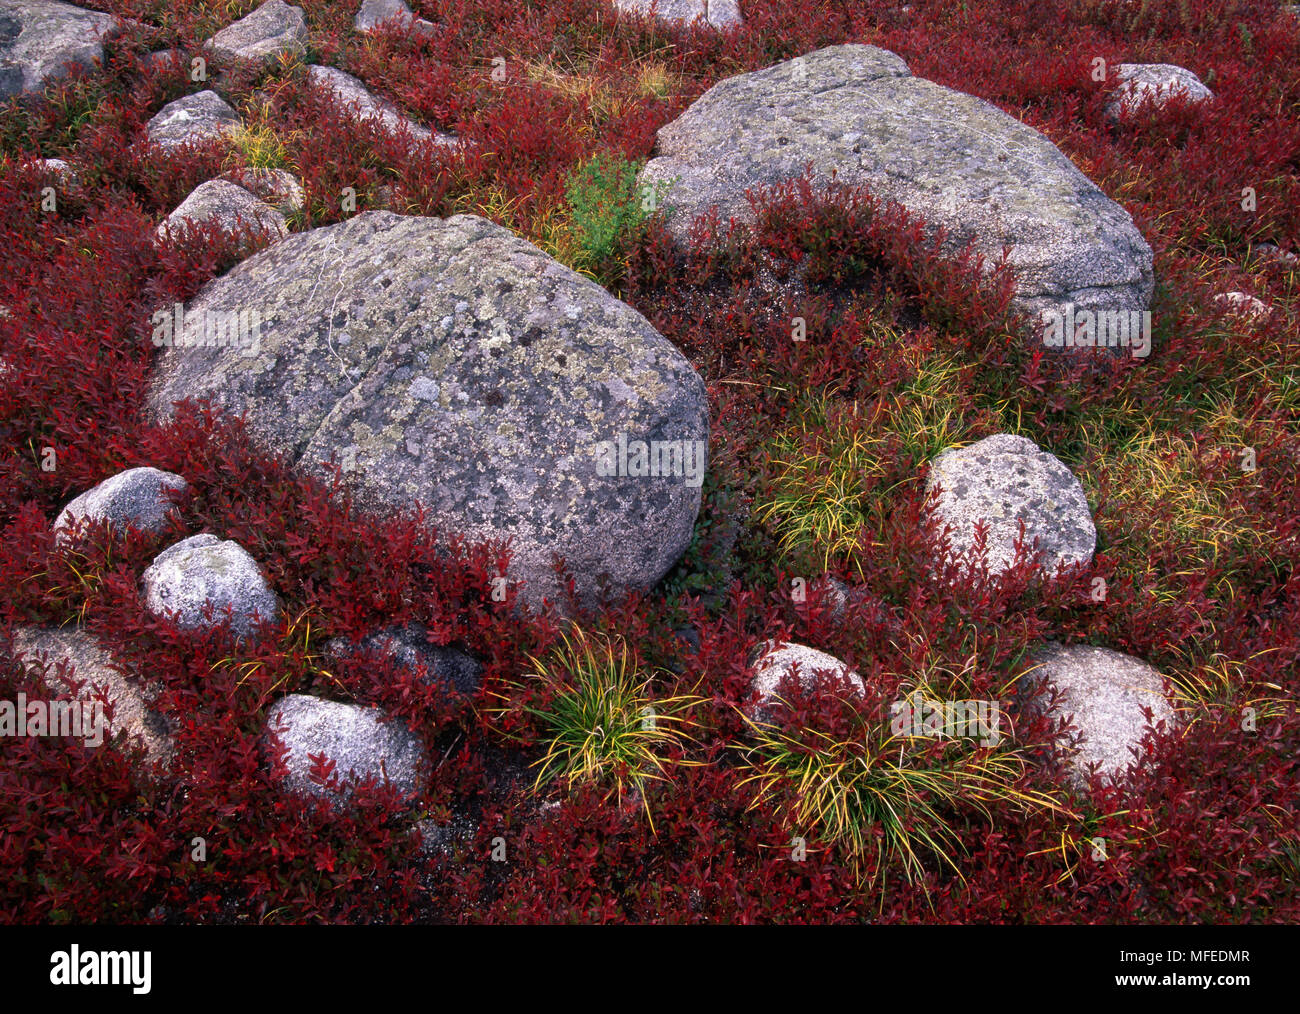 BLUEBERRY  Vaccinium sp. with foliage in autumn colours  Acadia Natl Park, Maine, USA Stock Photo